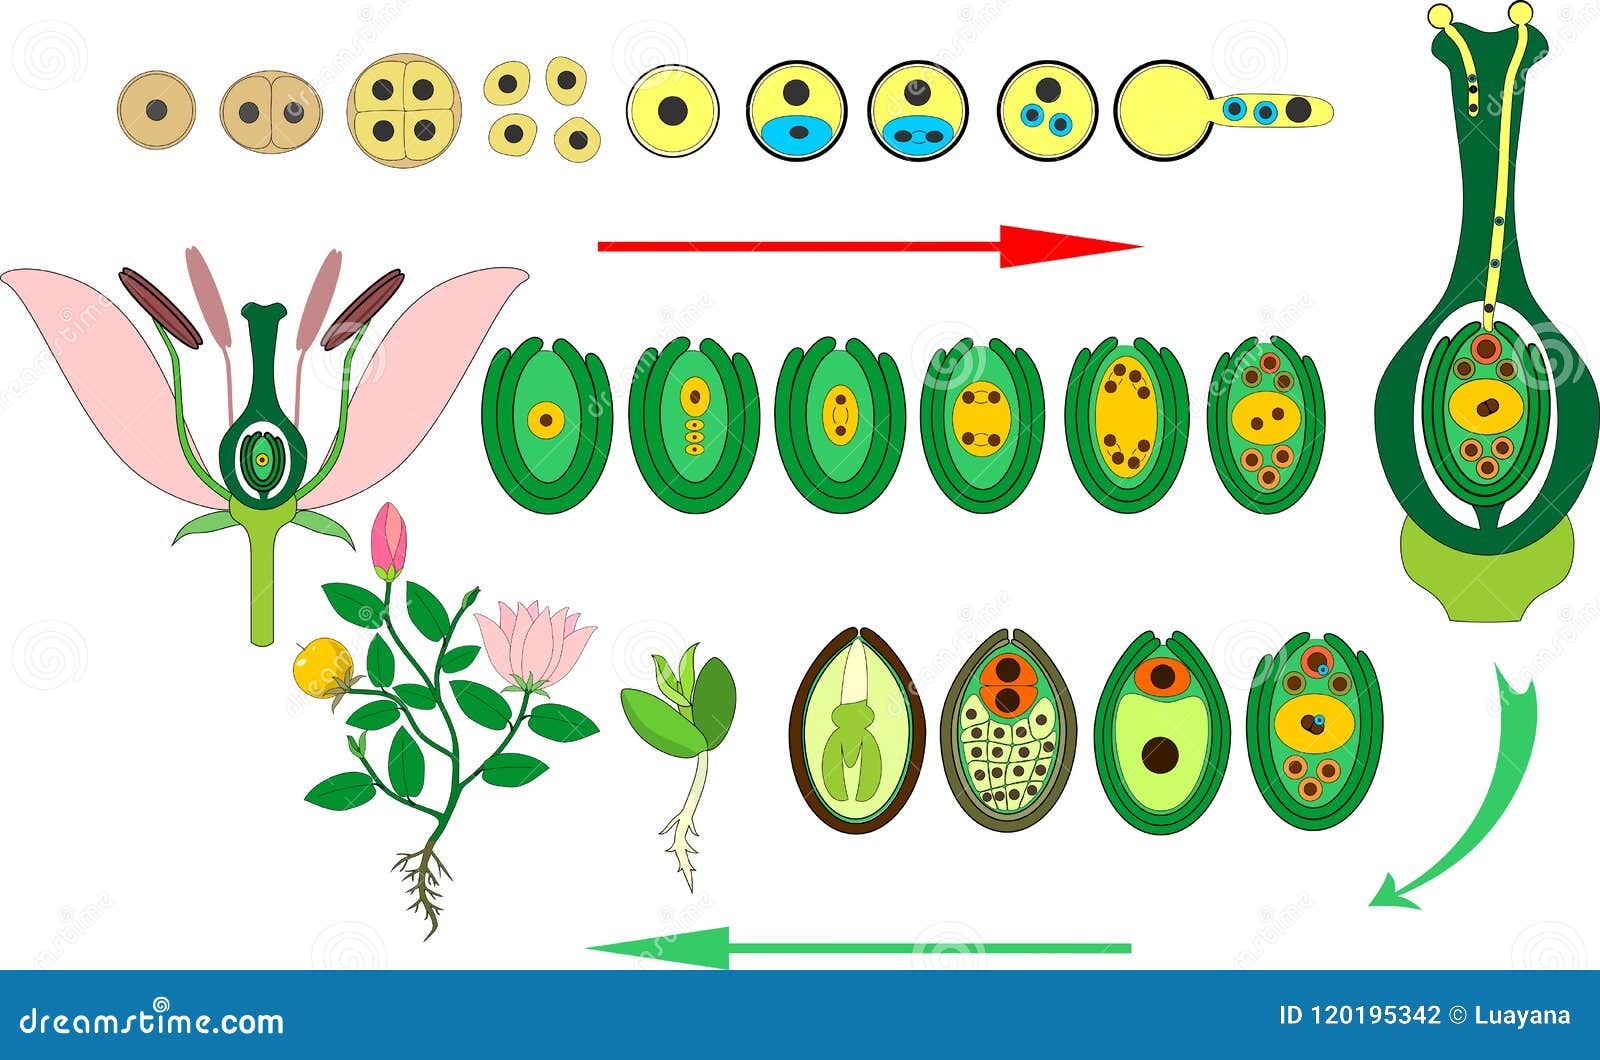 angiosperm plant life cycle. diagram of life cycle of flowering plant with double fertilization